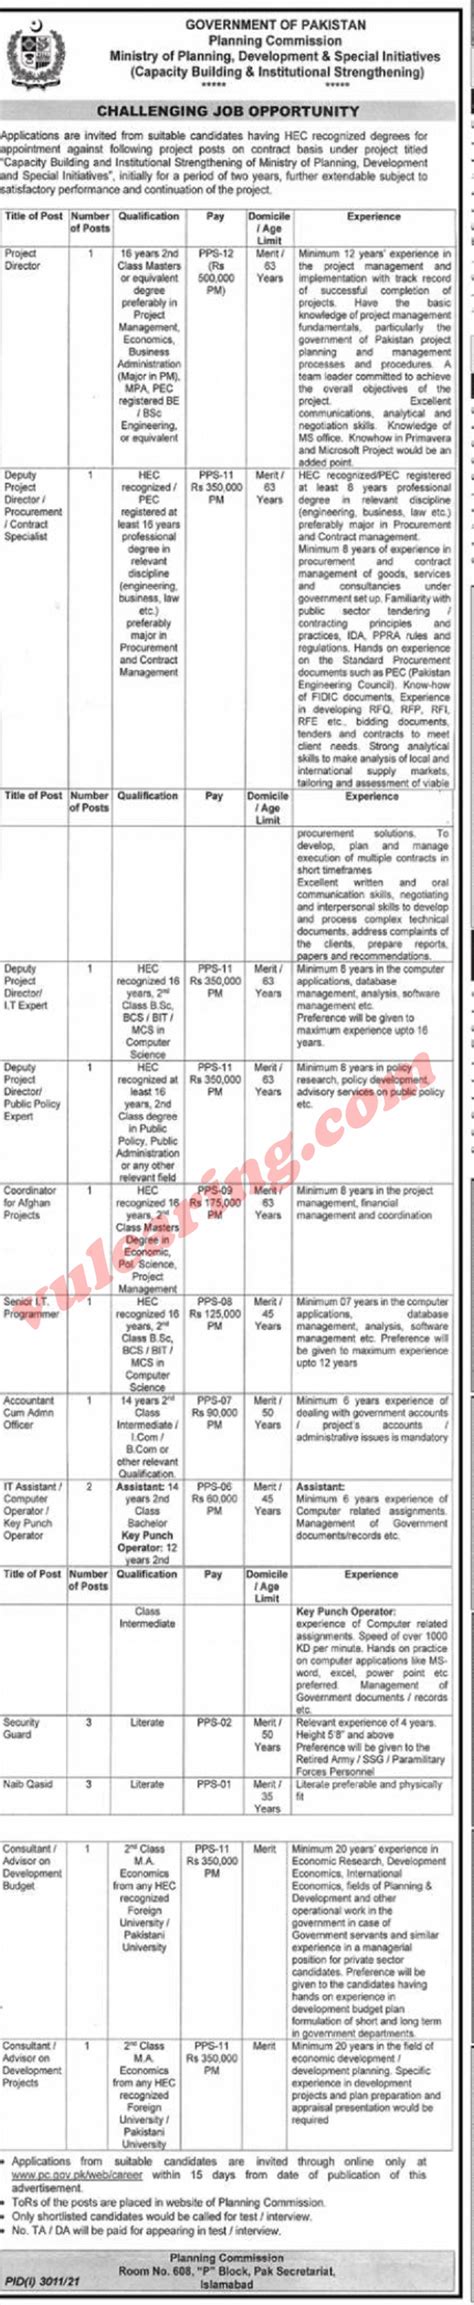 Planning Commission Islamabad Jobs 2021 Apply Online Ministry Of